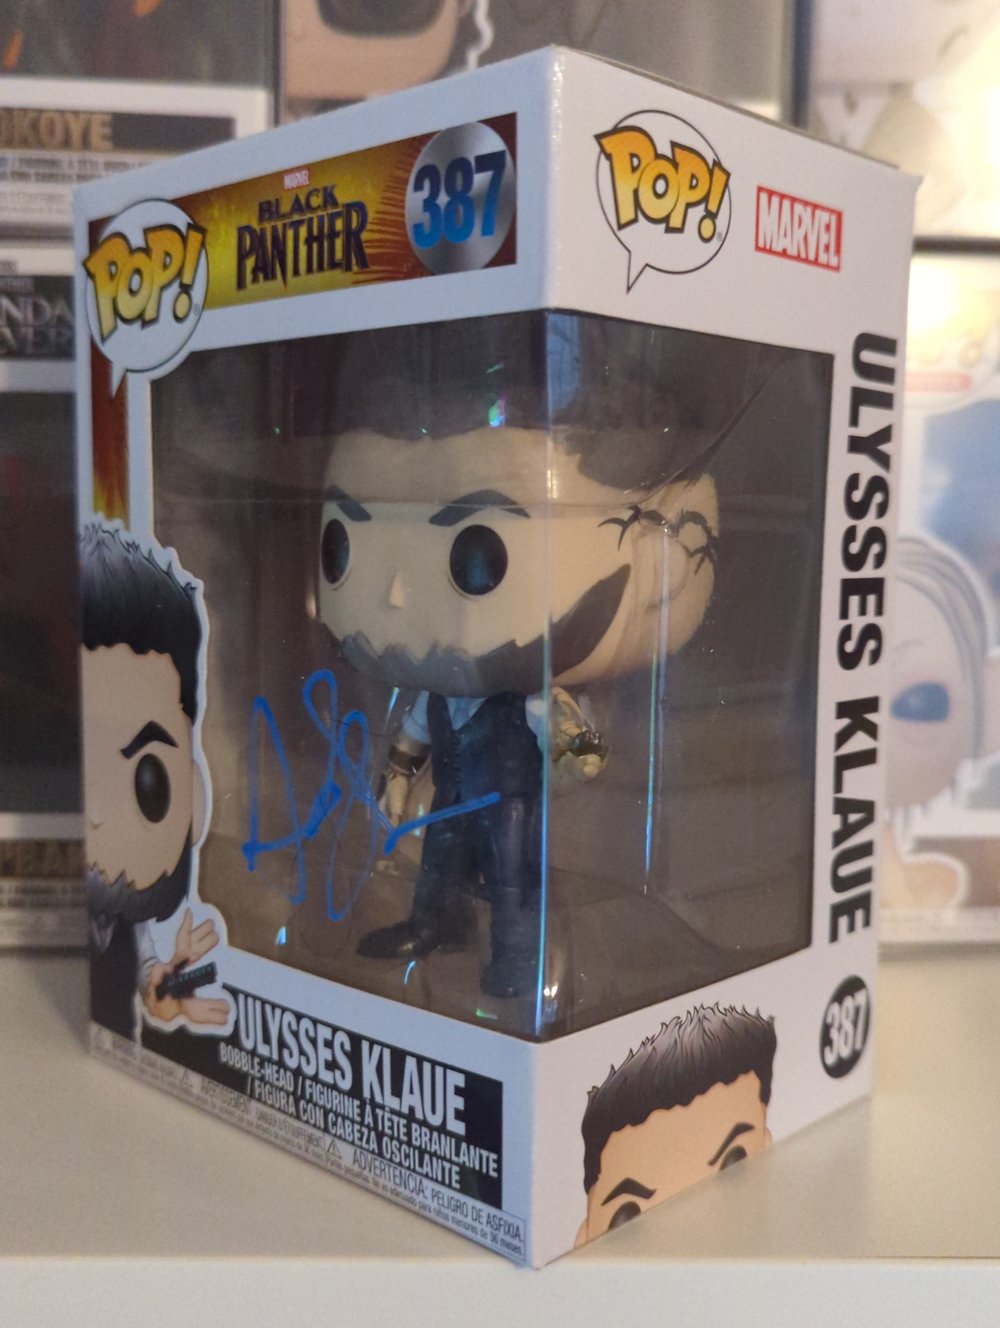 Black Panther Andy Serkis Signed Funko Pop